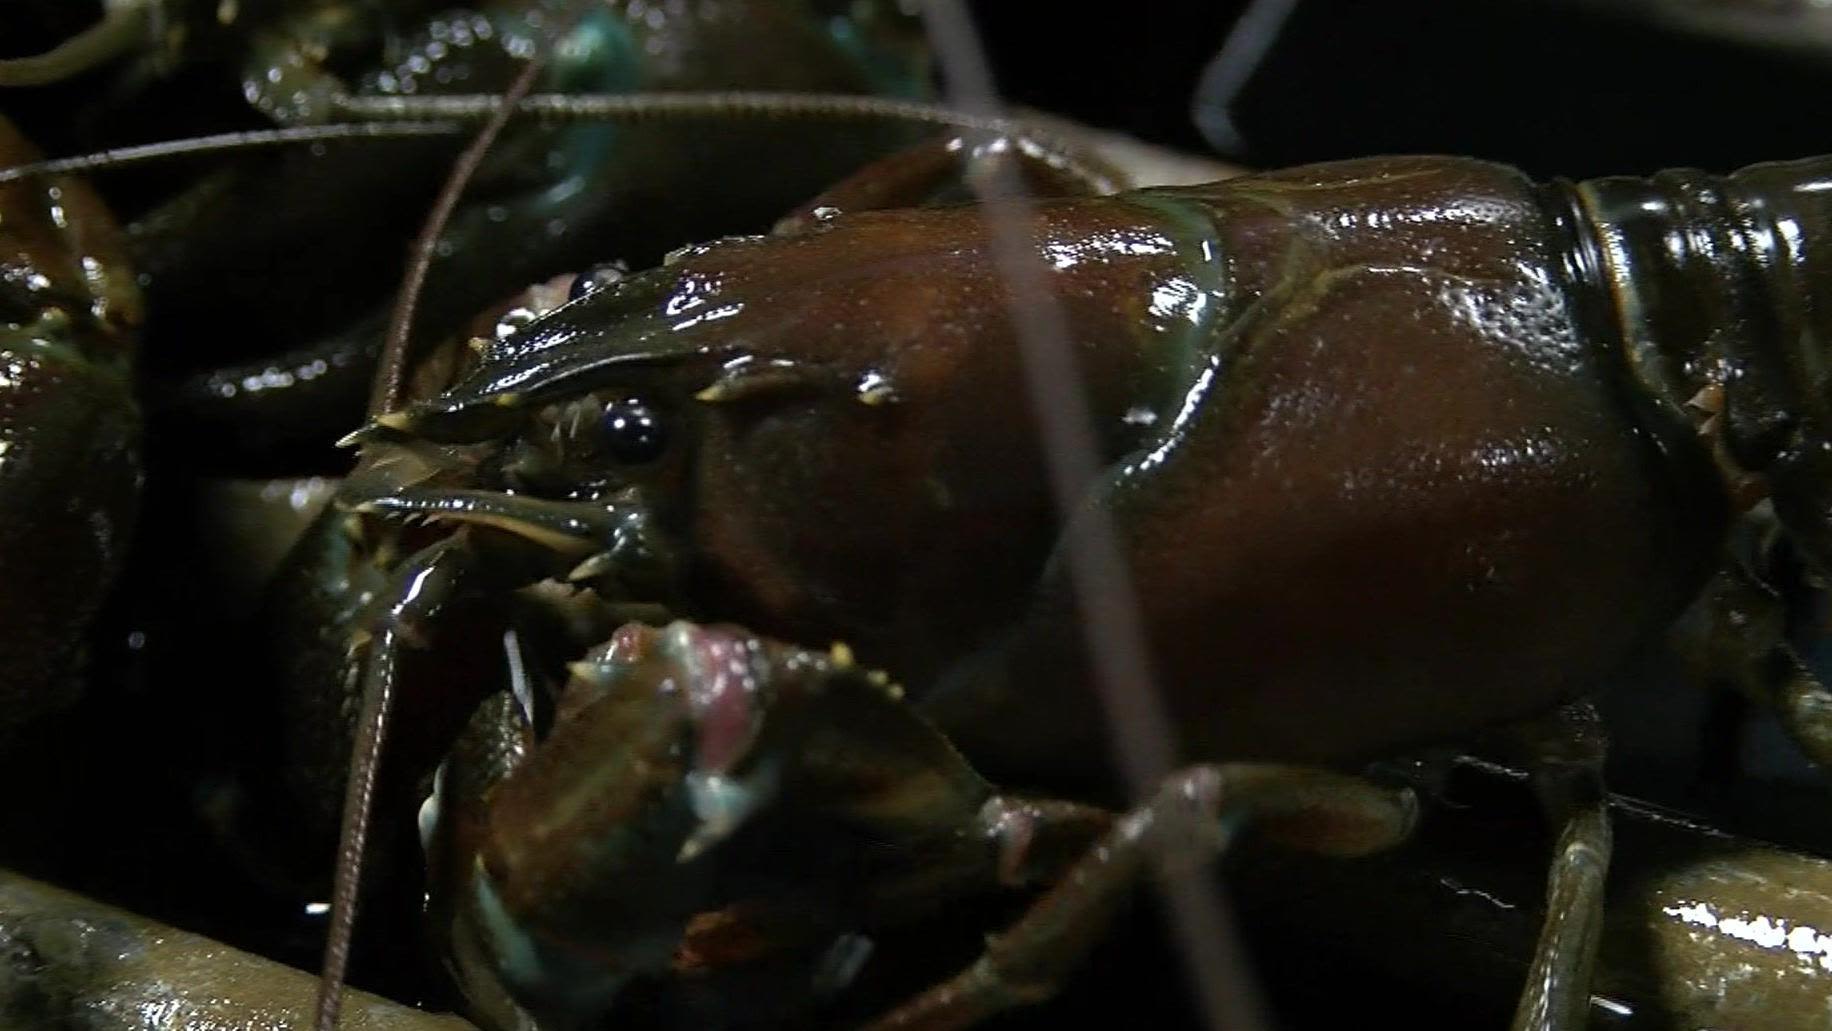 Eating invasive crayfish could prevent river damage